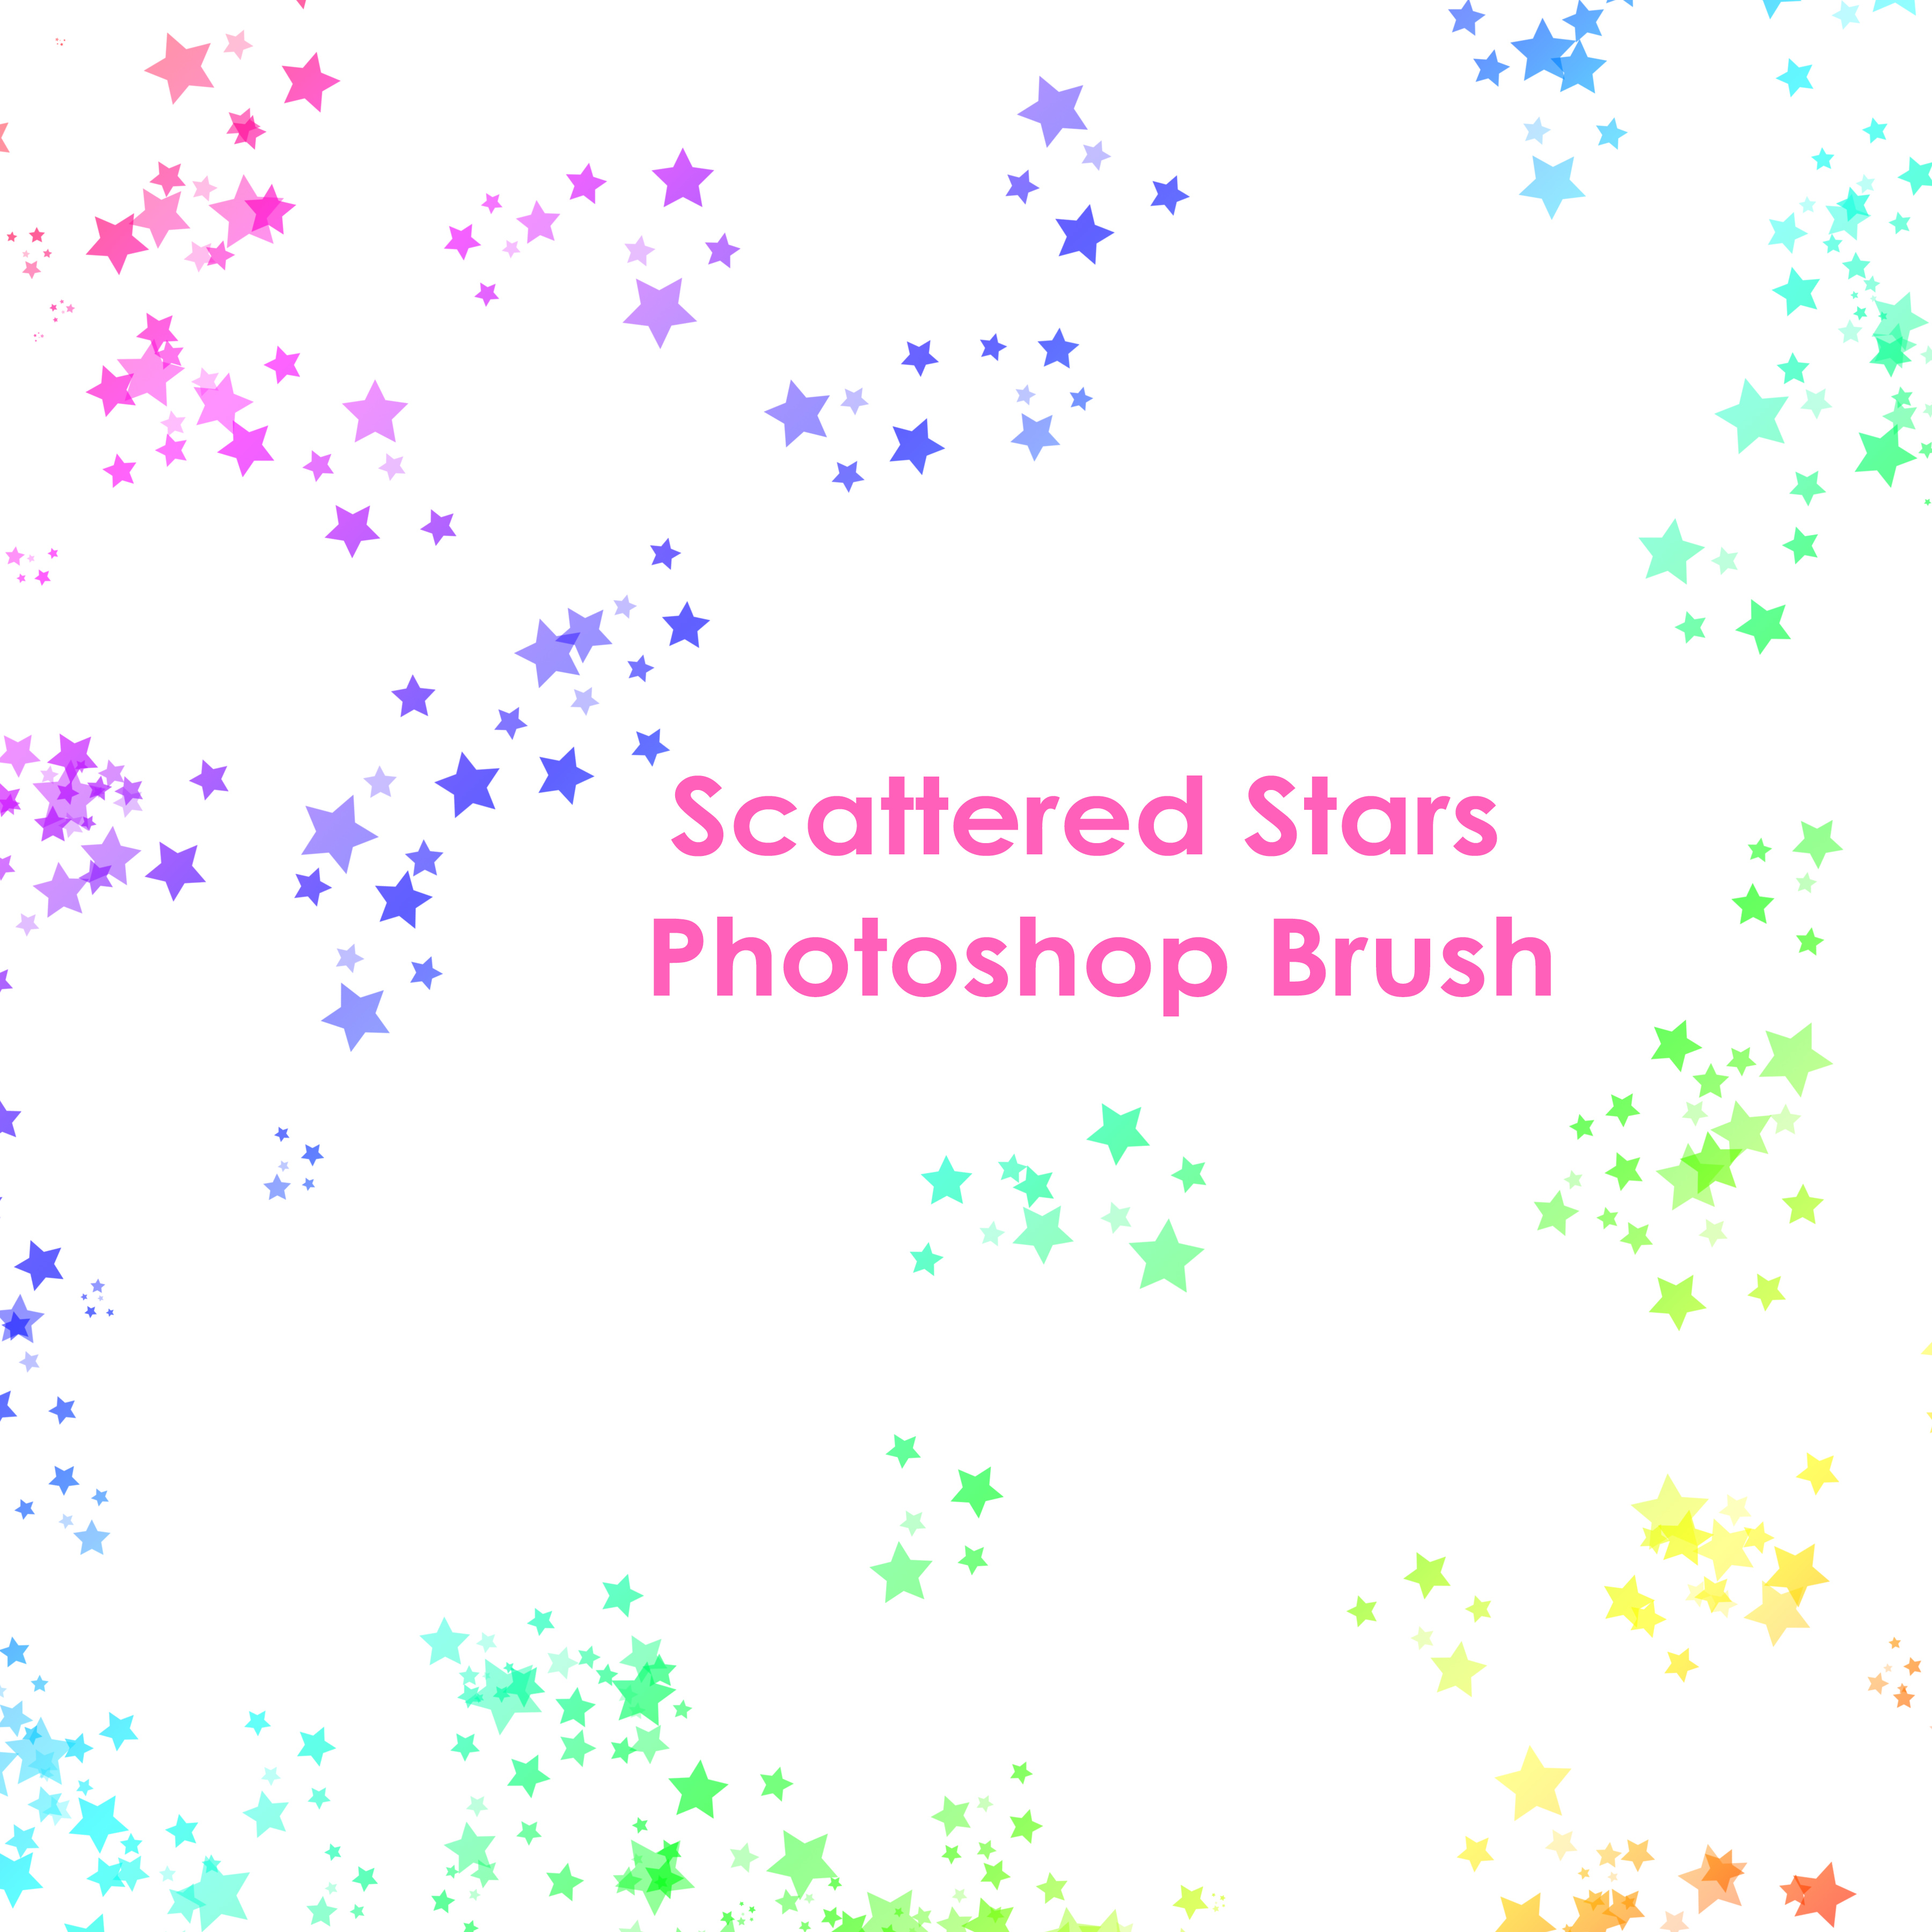 Star Brushes For Photoshop 44